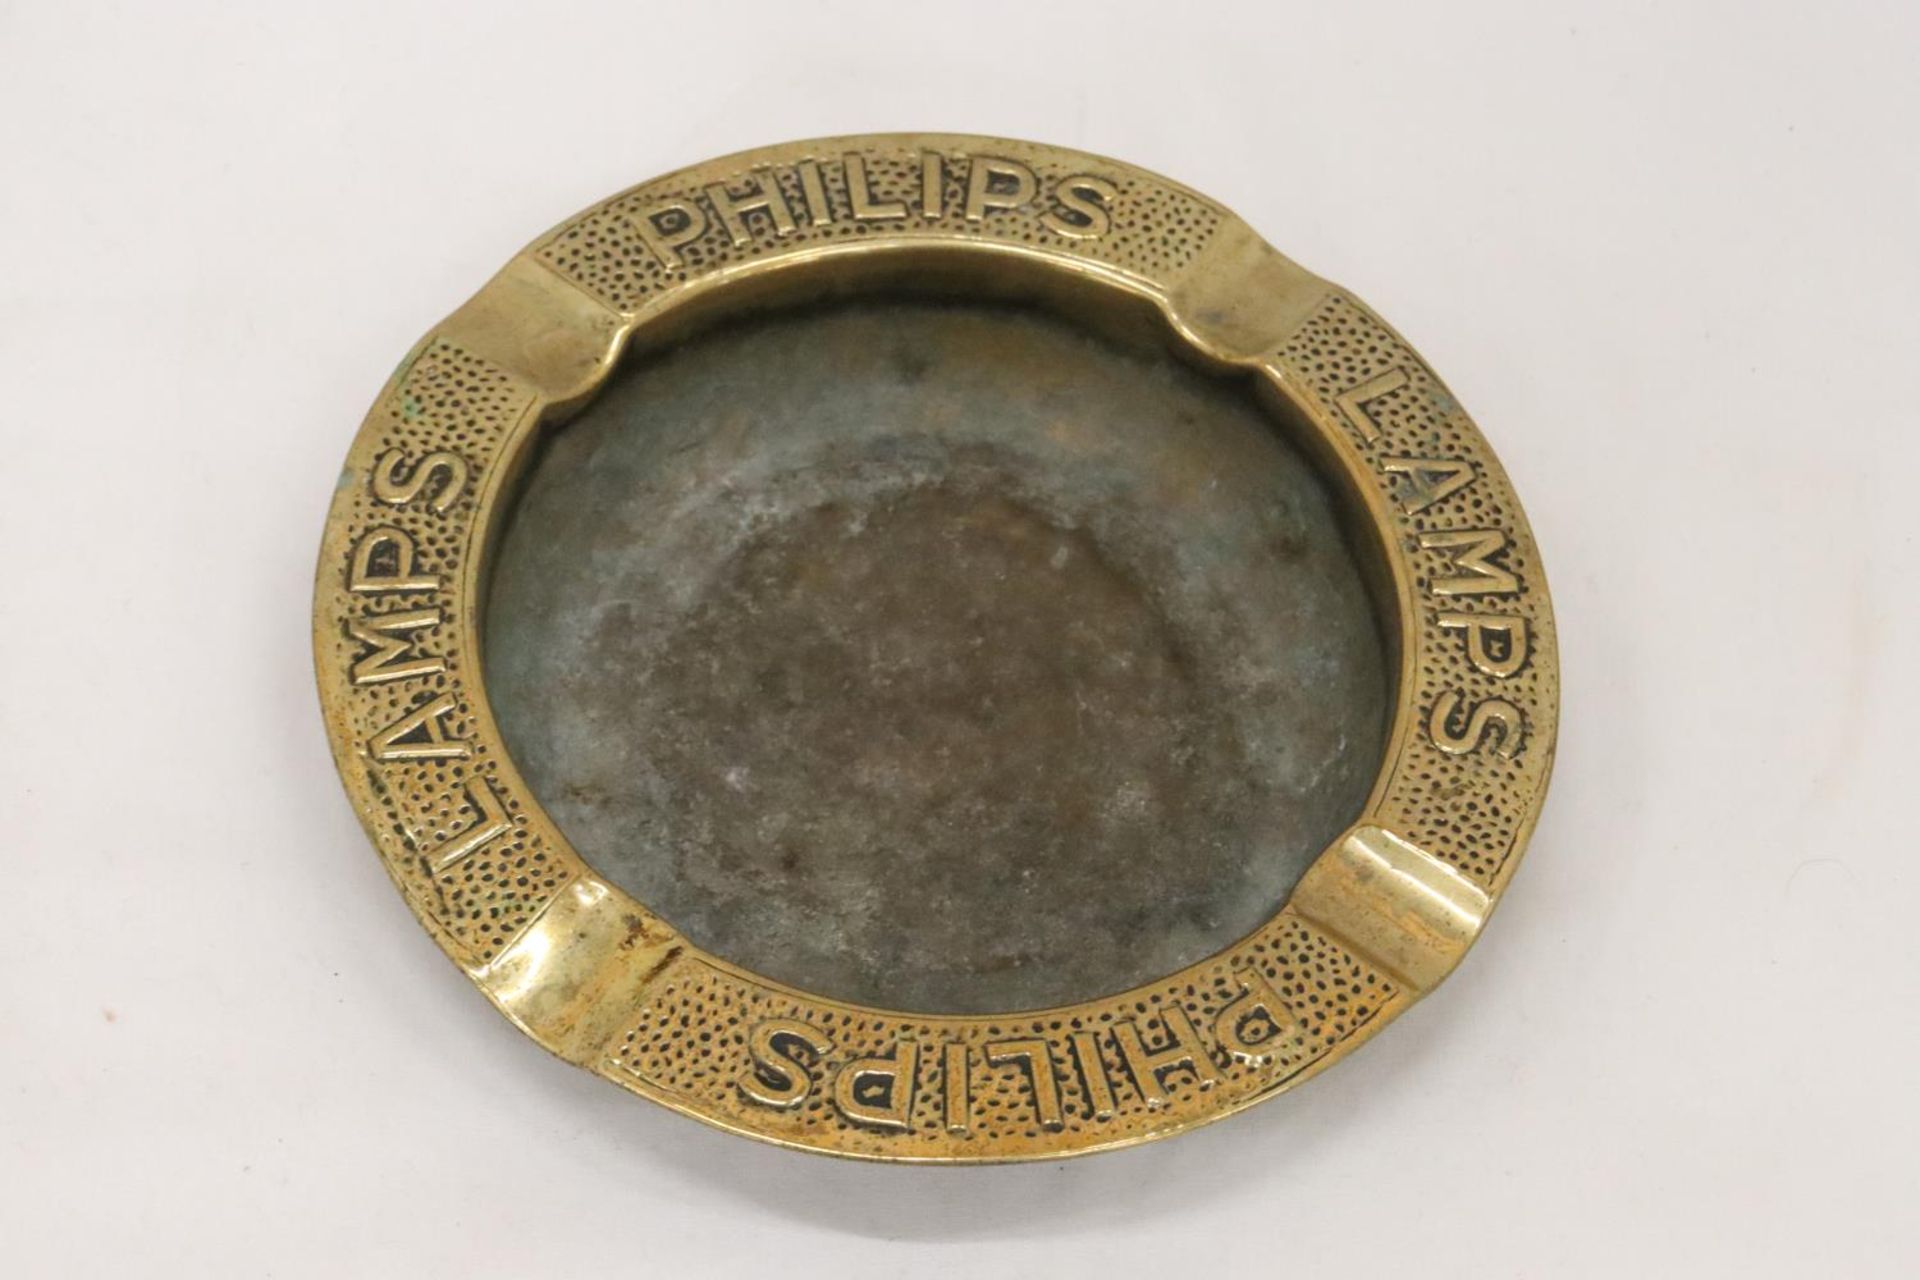 A LARGE 1930'S BRASS ADVERTISING ASHTRAY PHILIPS LAMPS